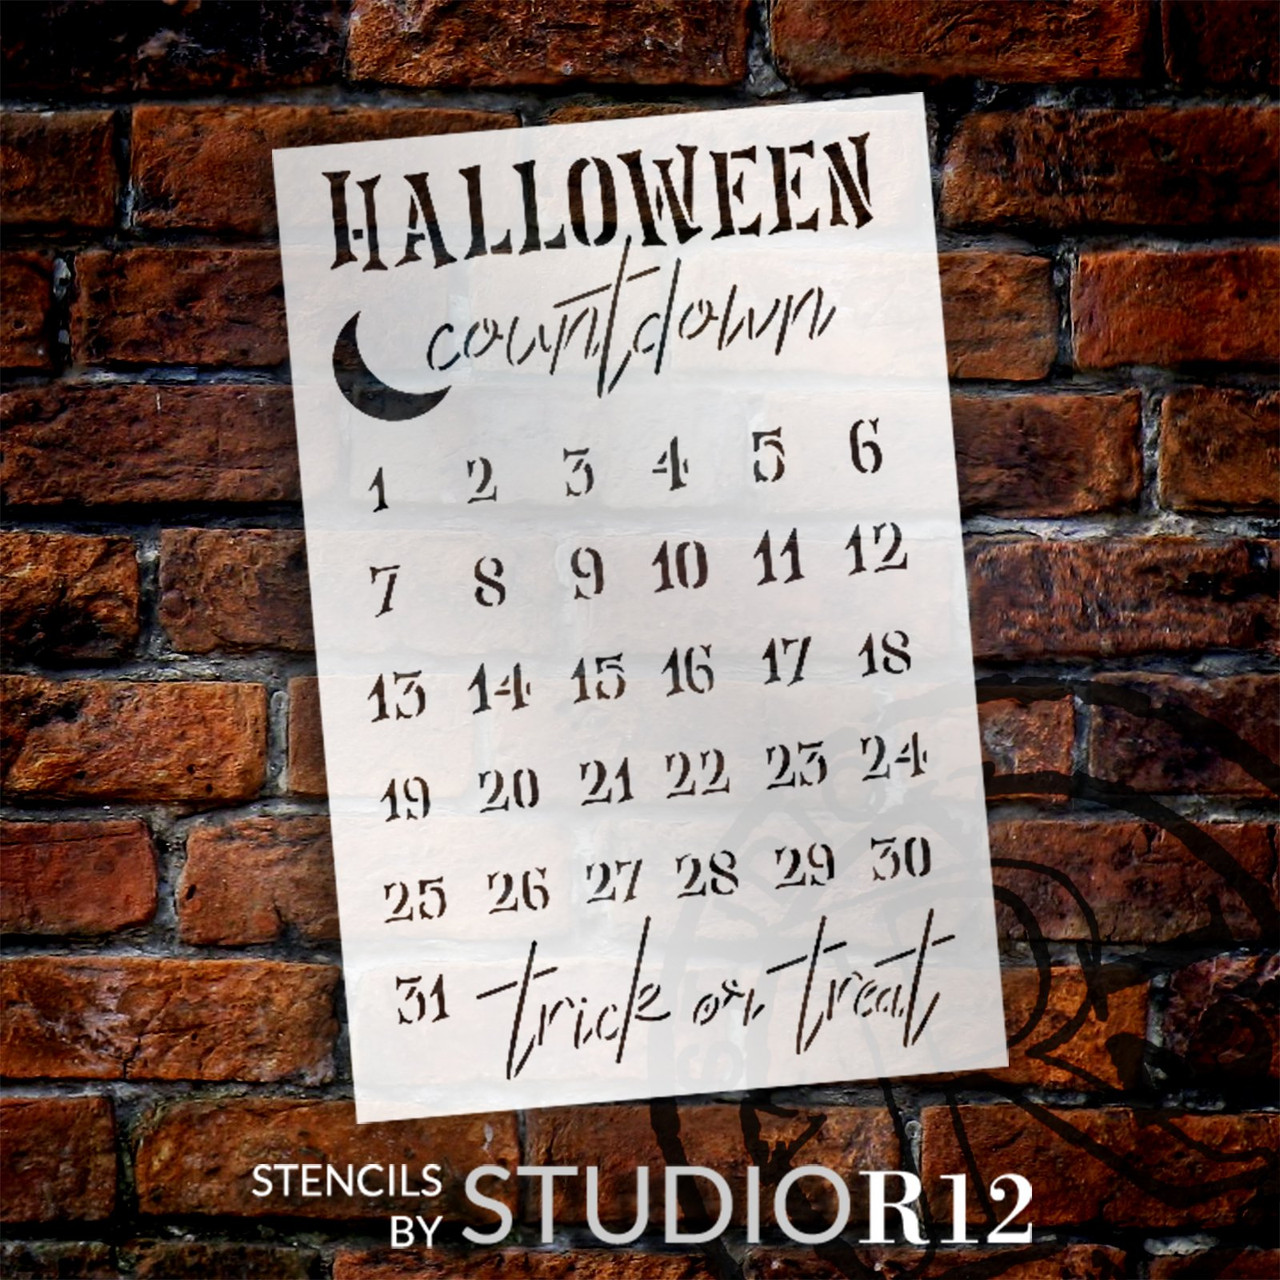 Halloween Countdown Numerals Stencil by StudioR12 - Select Size - USA Made - Craft DIY October Advent Calendar Decor | Paint Seasonal Fall Wood Sign